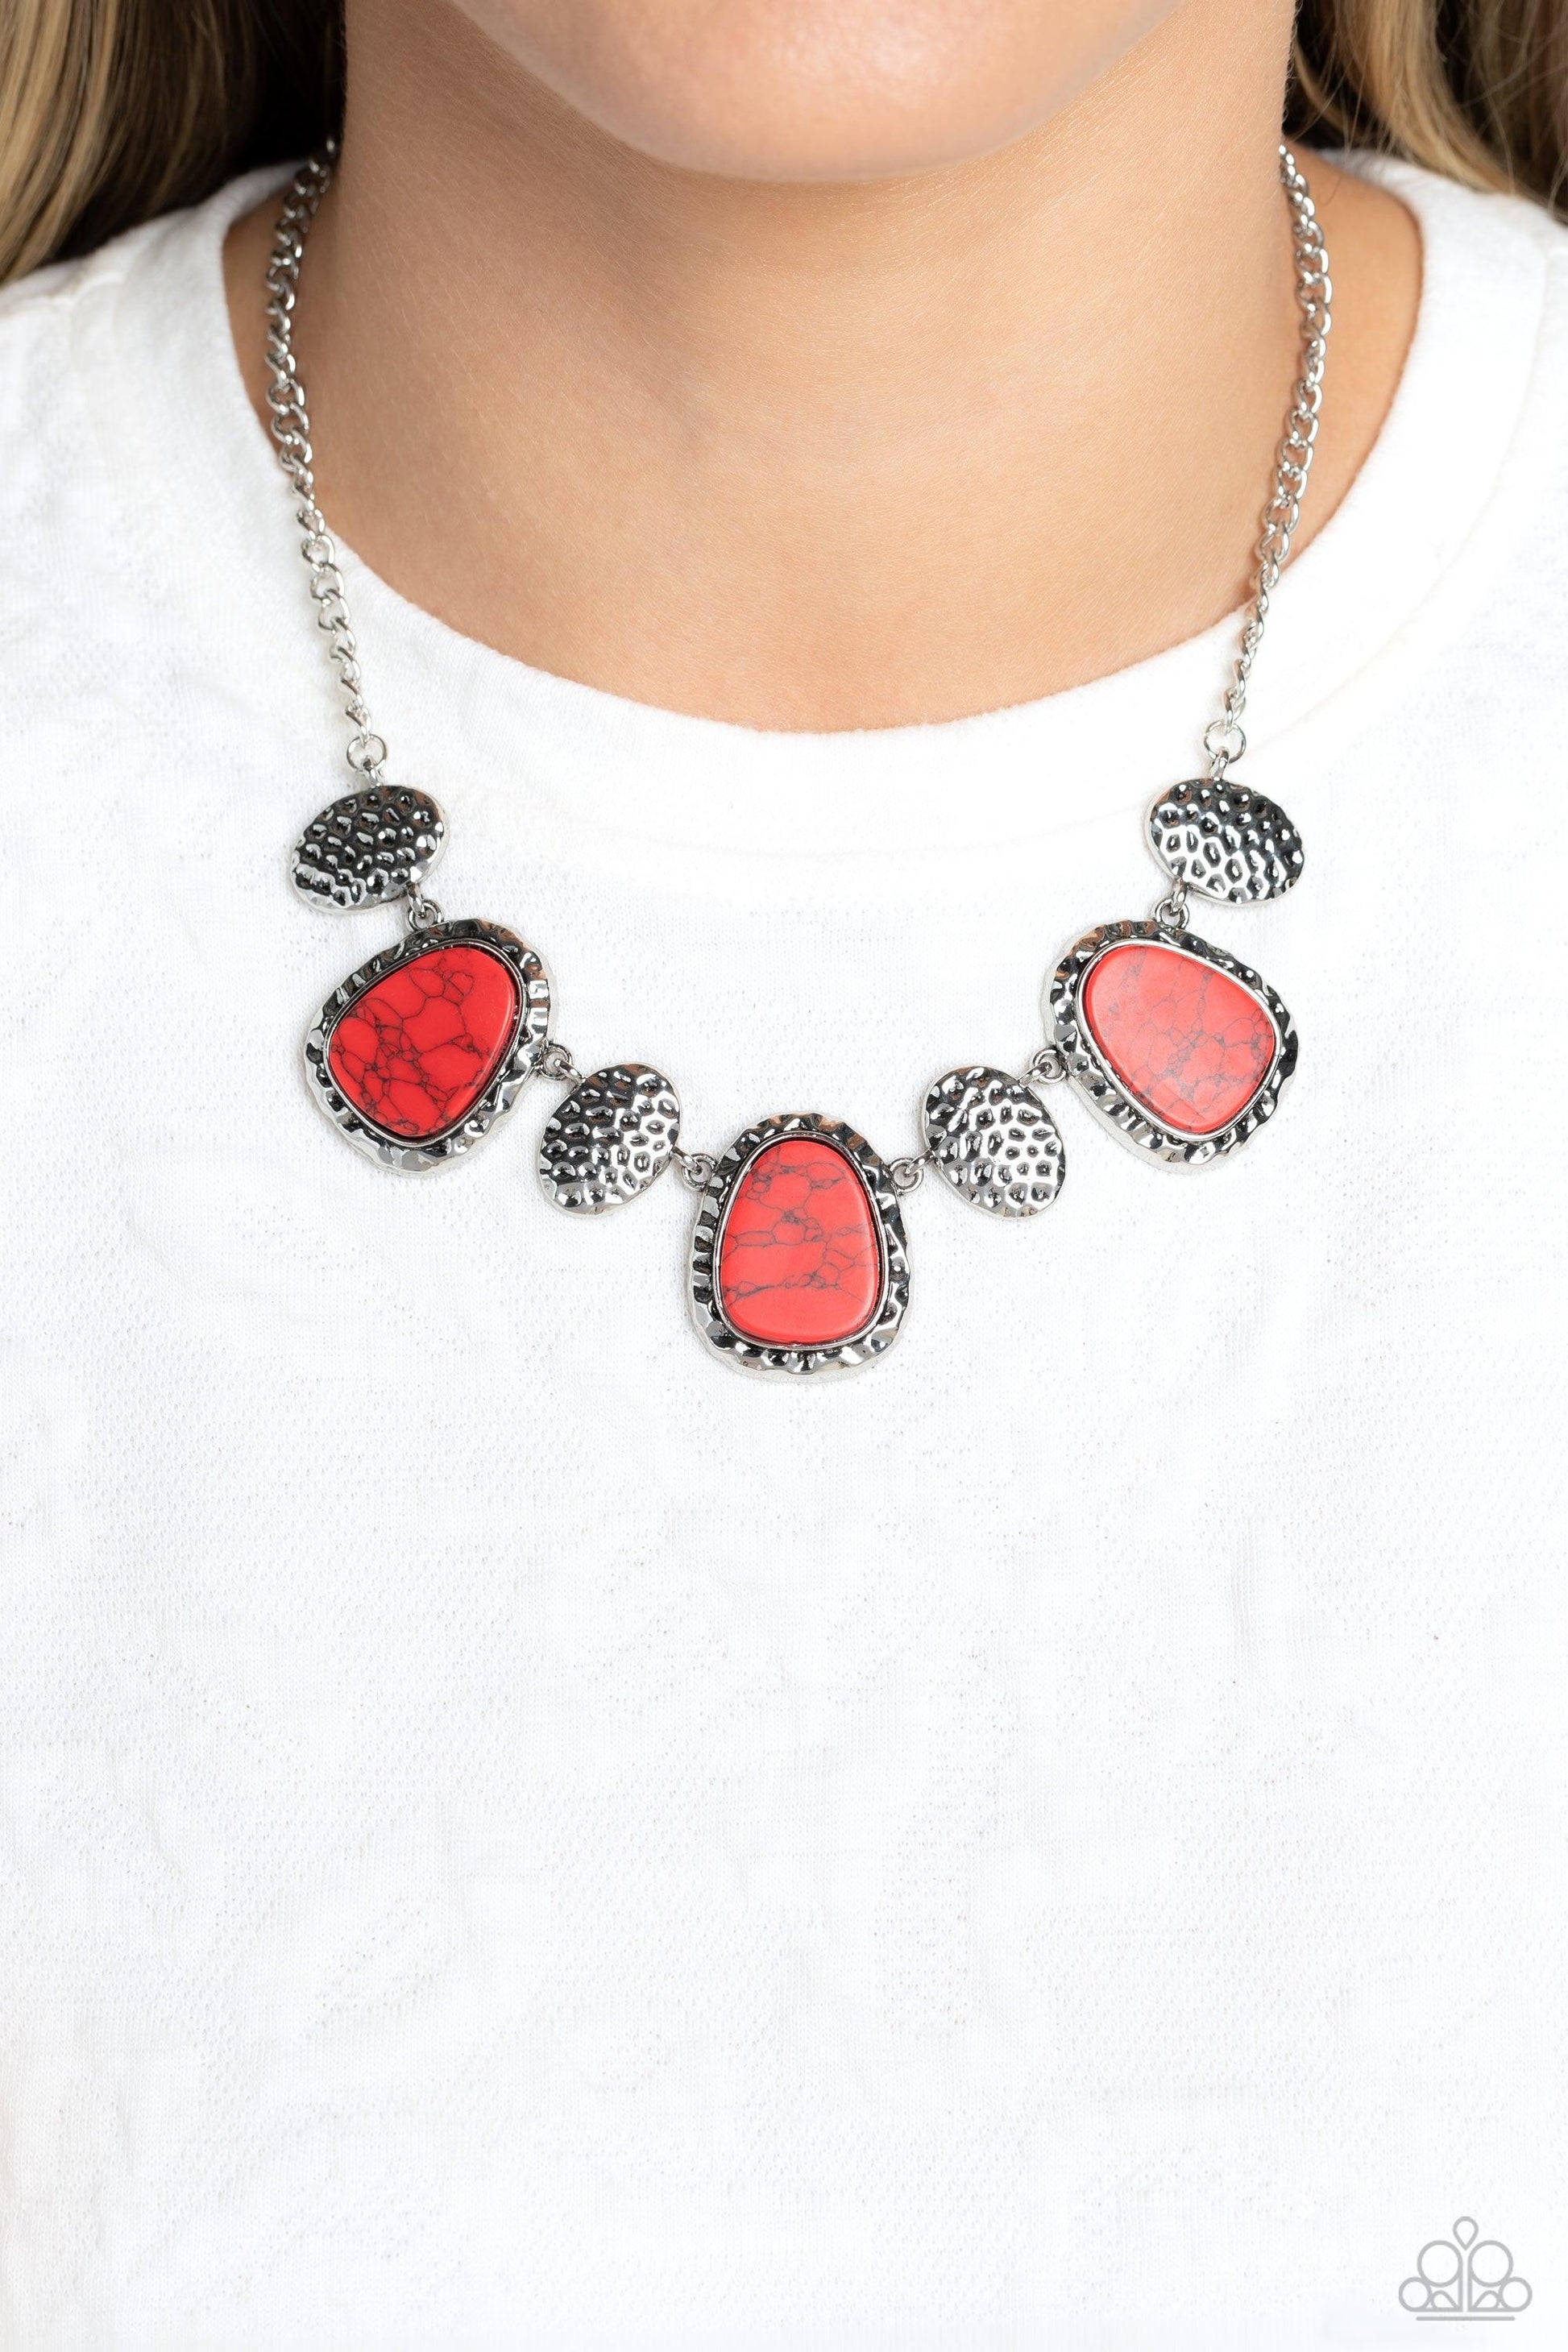 Paparazzi Accessories - Badlands Border - Red Necklace - Bling by JessieK